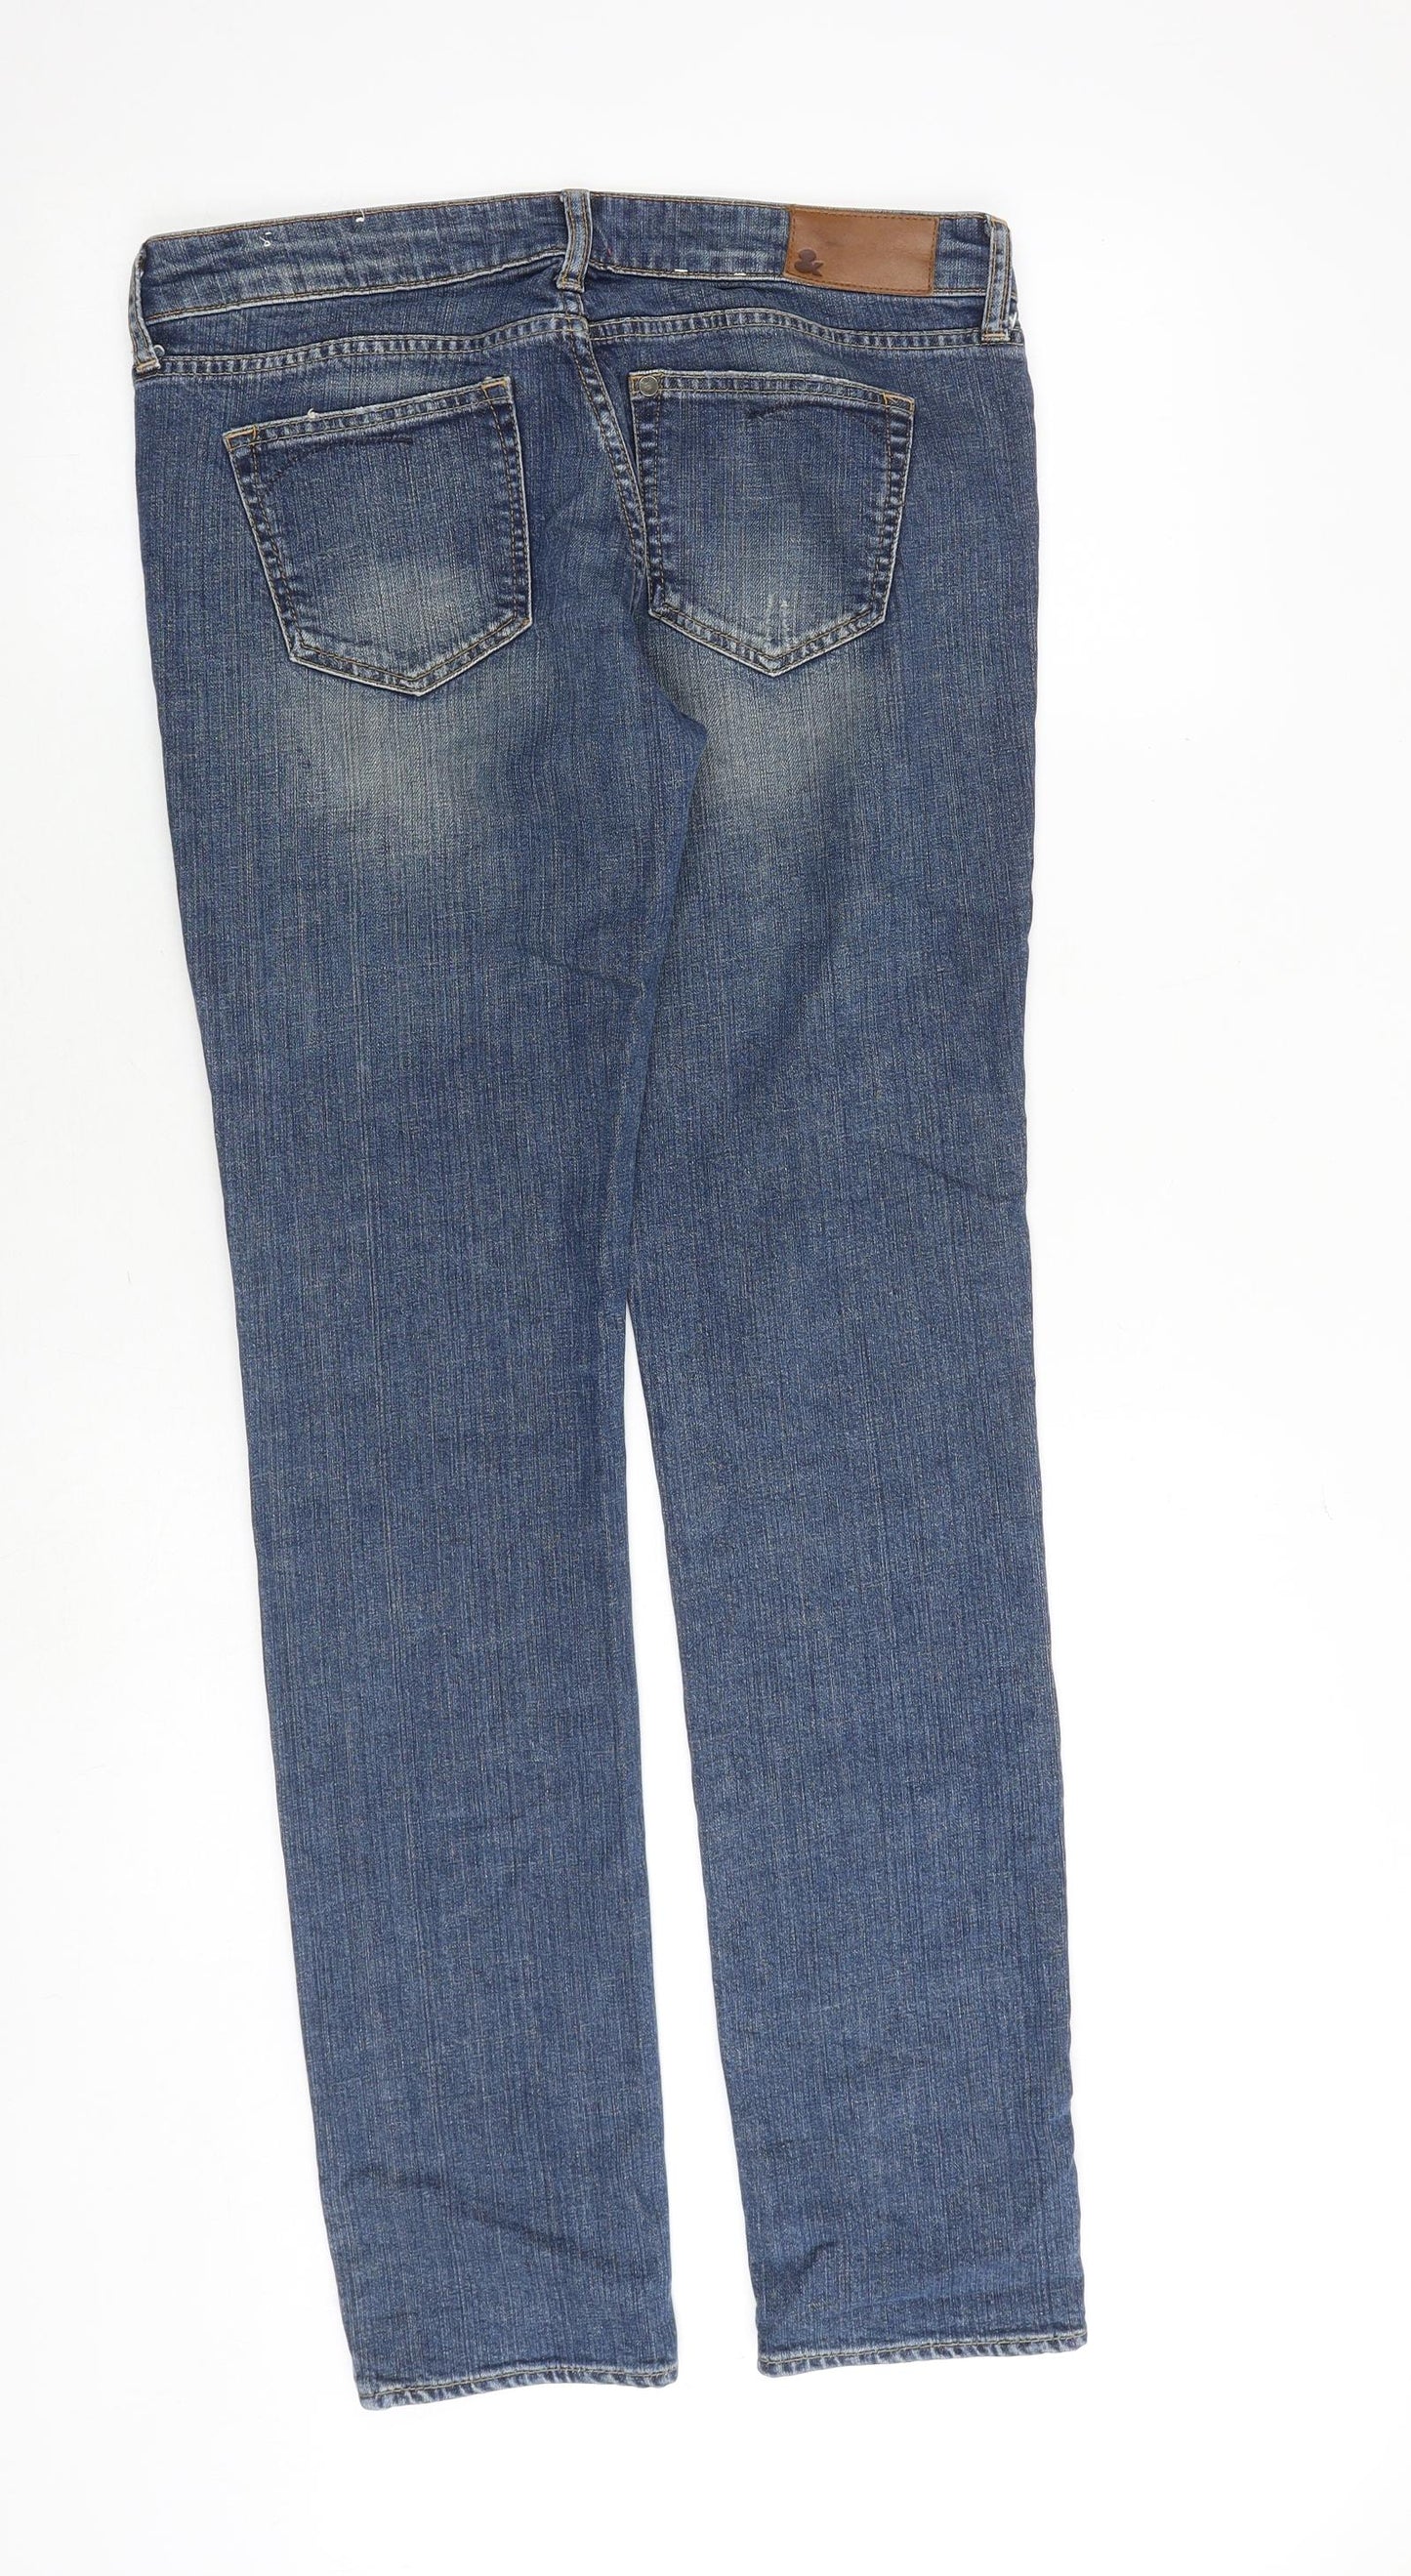 H&M Womens Blue Cotton Skinny Jeans Size 30 in Regular Zip